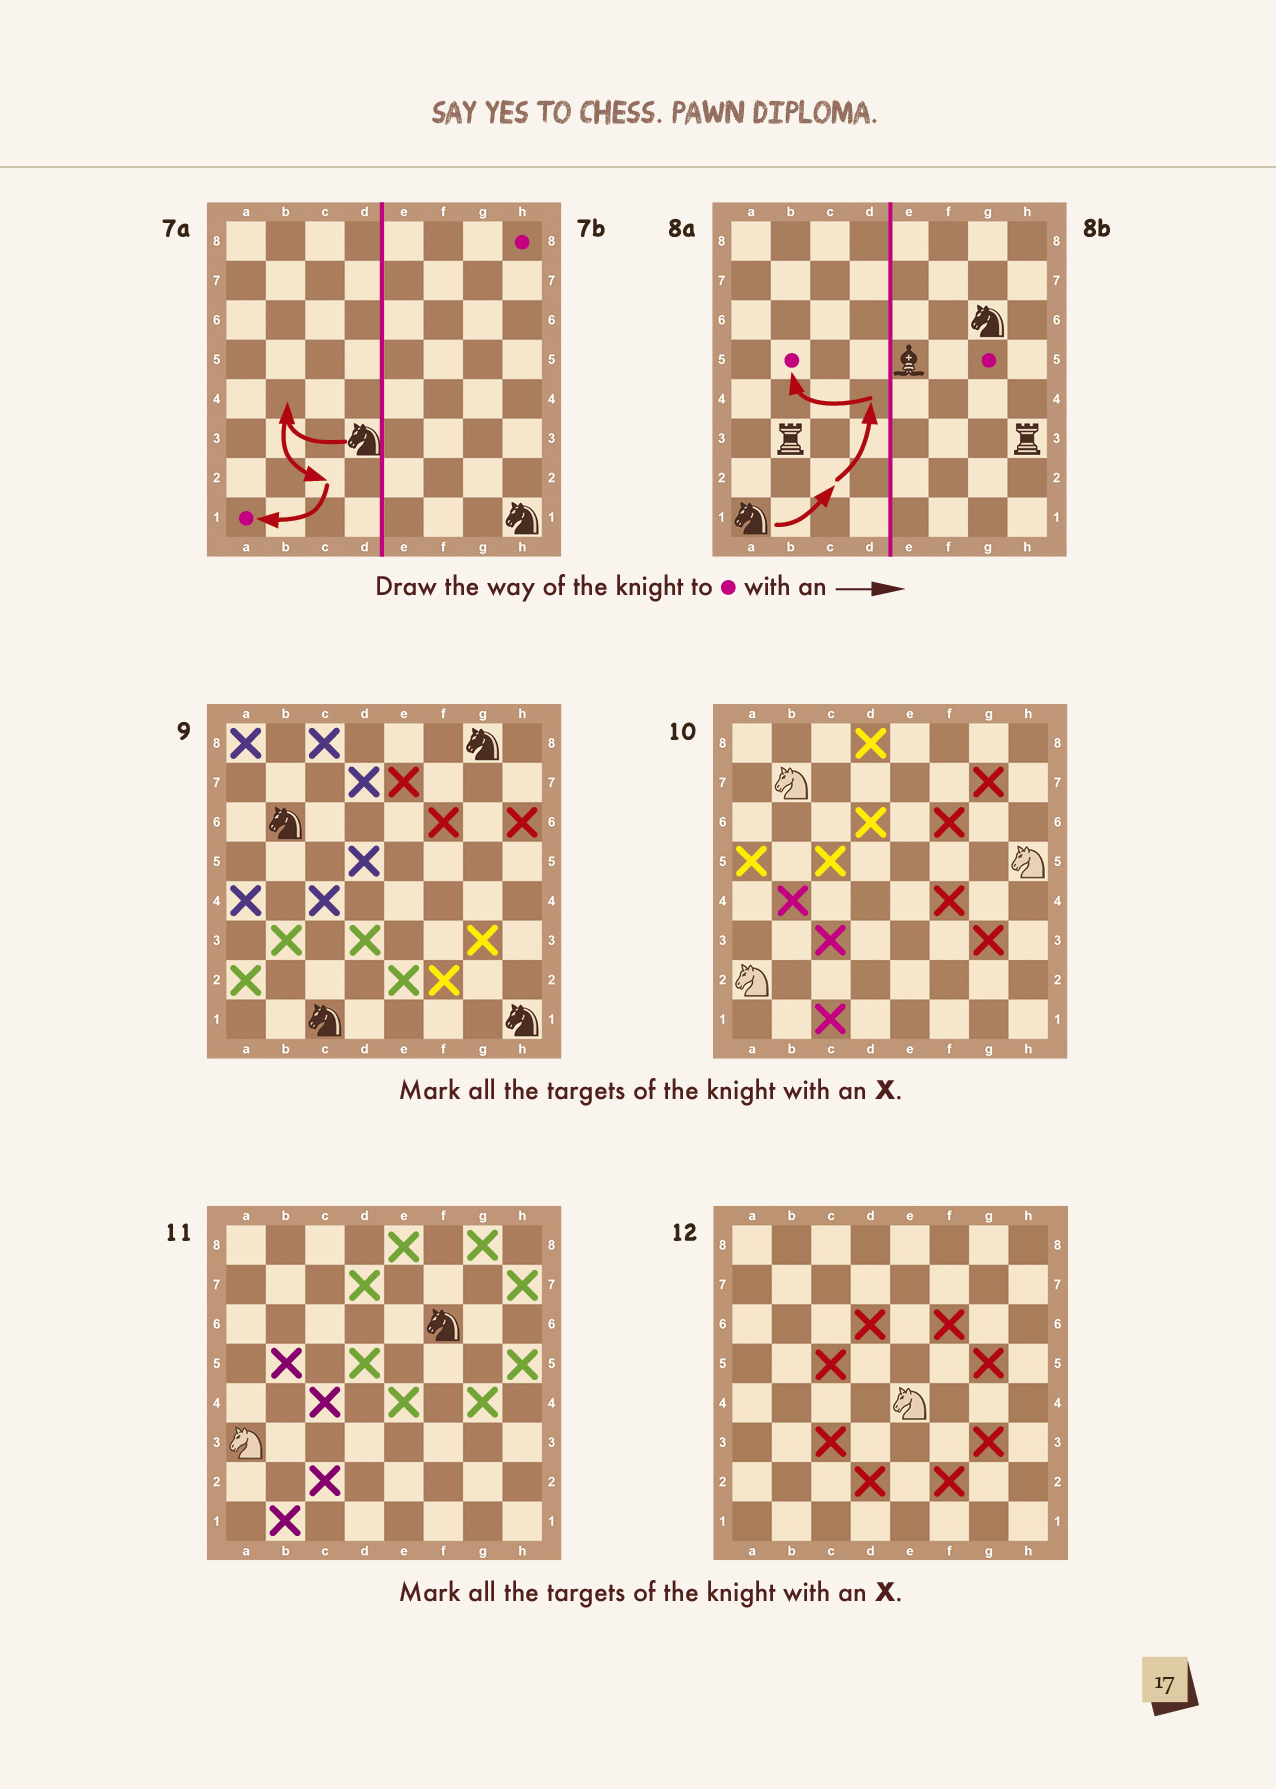 sayyes2chess_solutions_page_17.jpg